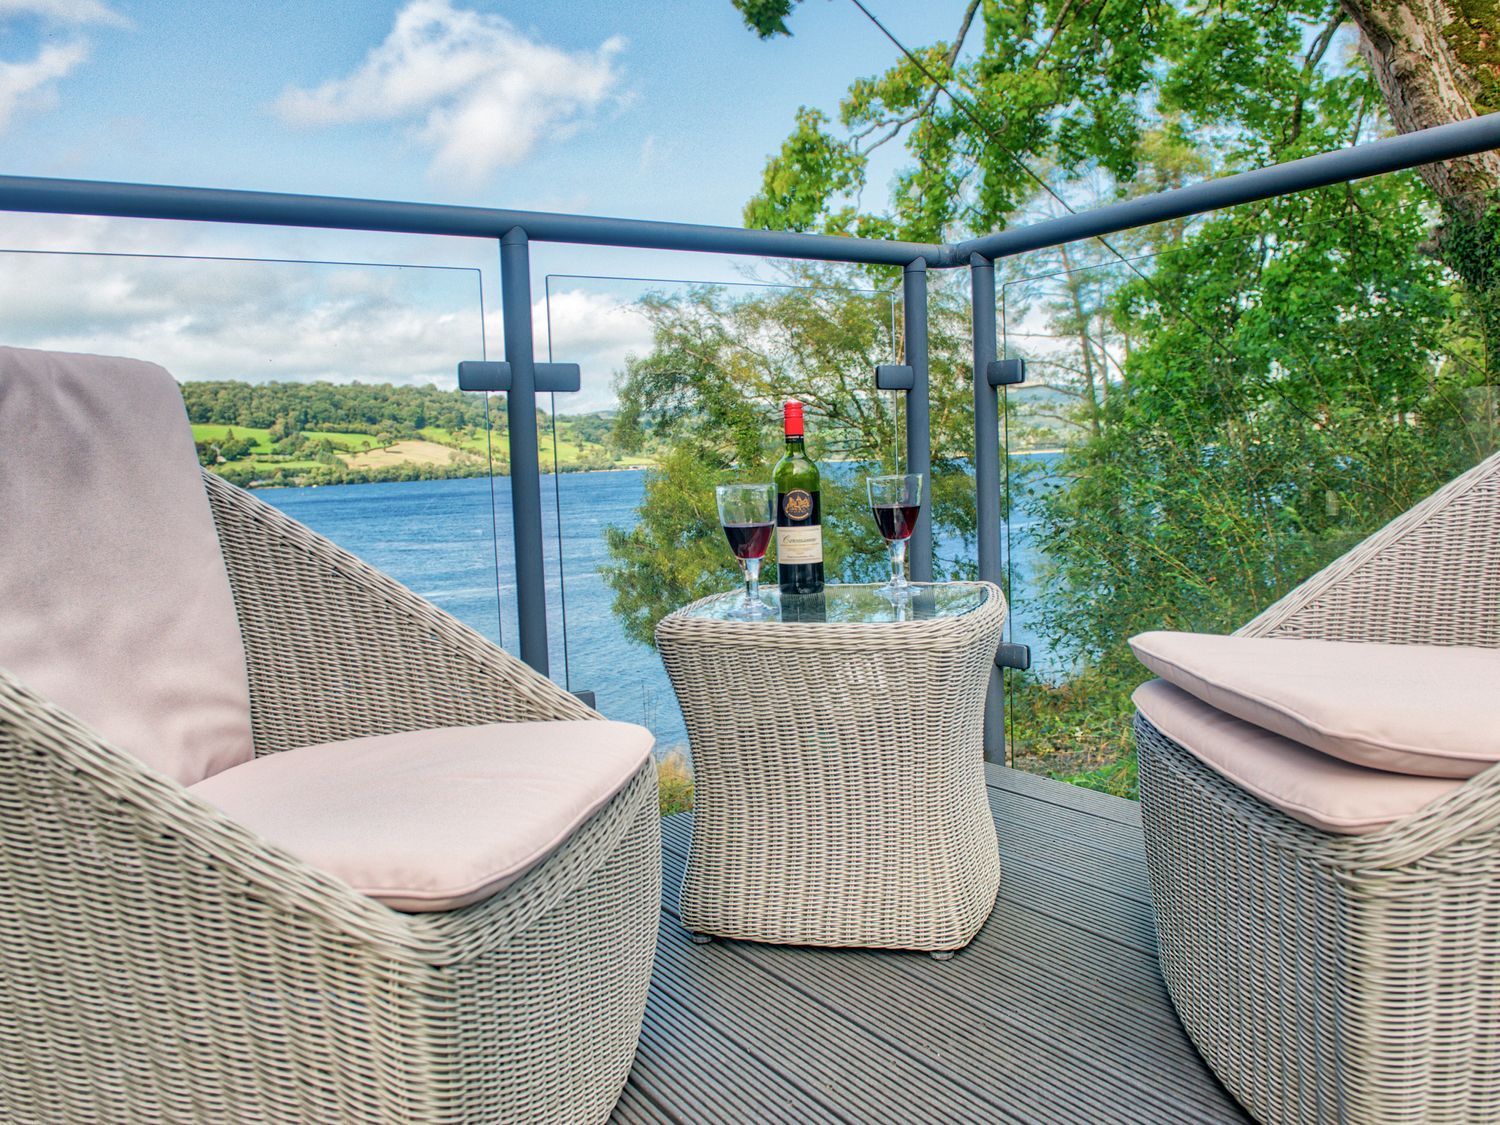 Vyrnwy Lakeside Apartment - North Wales - 1128278 - photo 1